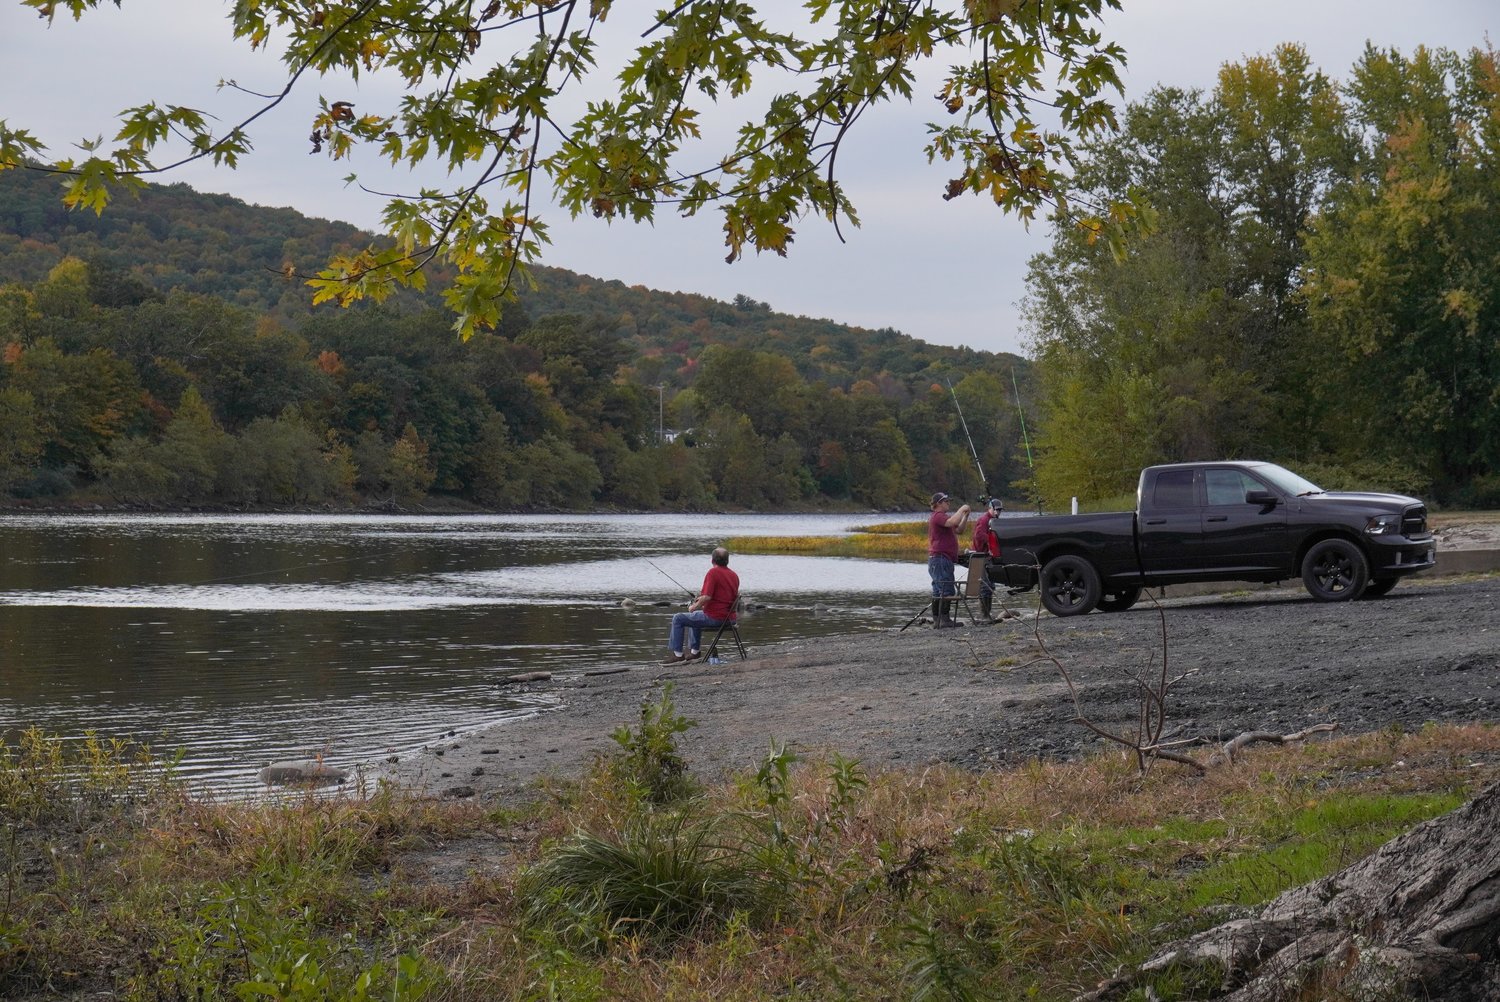 Many people enjoy fishing on the Delaware River. River and ocean health depend on properly disposing of any line or trash from fishing activities.